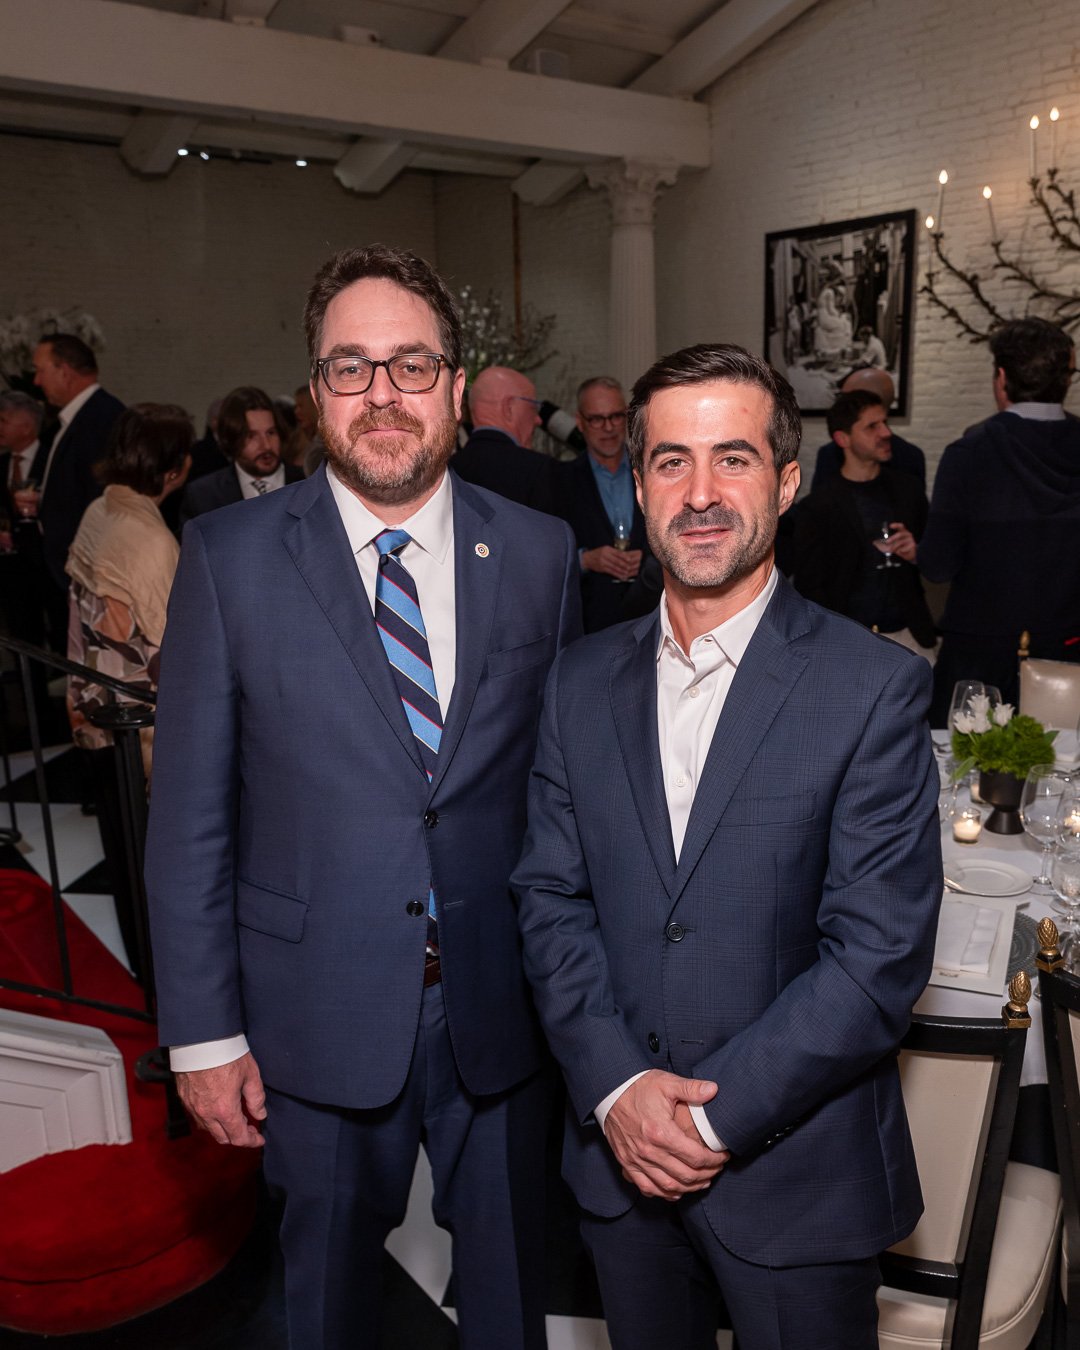 CAC Board Chair Andrew Davis (Right) with Board Member Francesc Martí